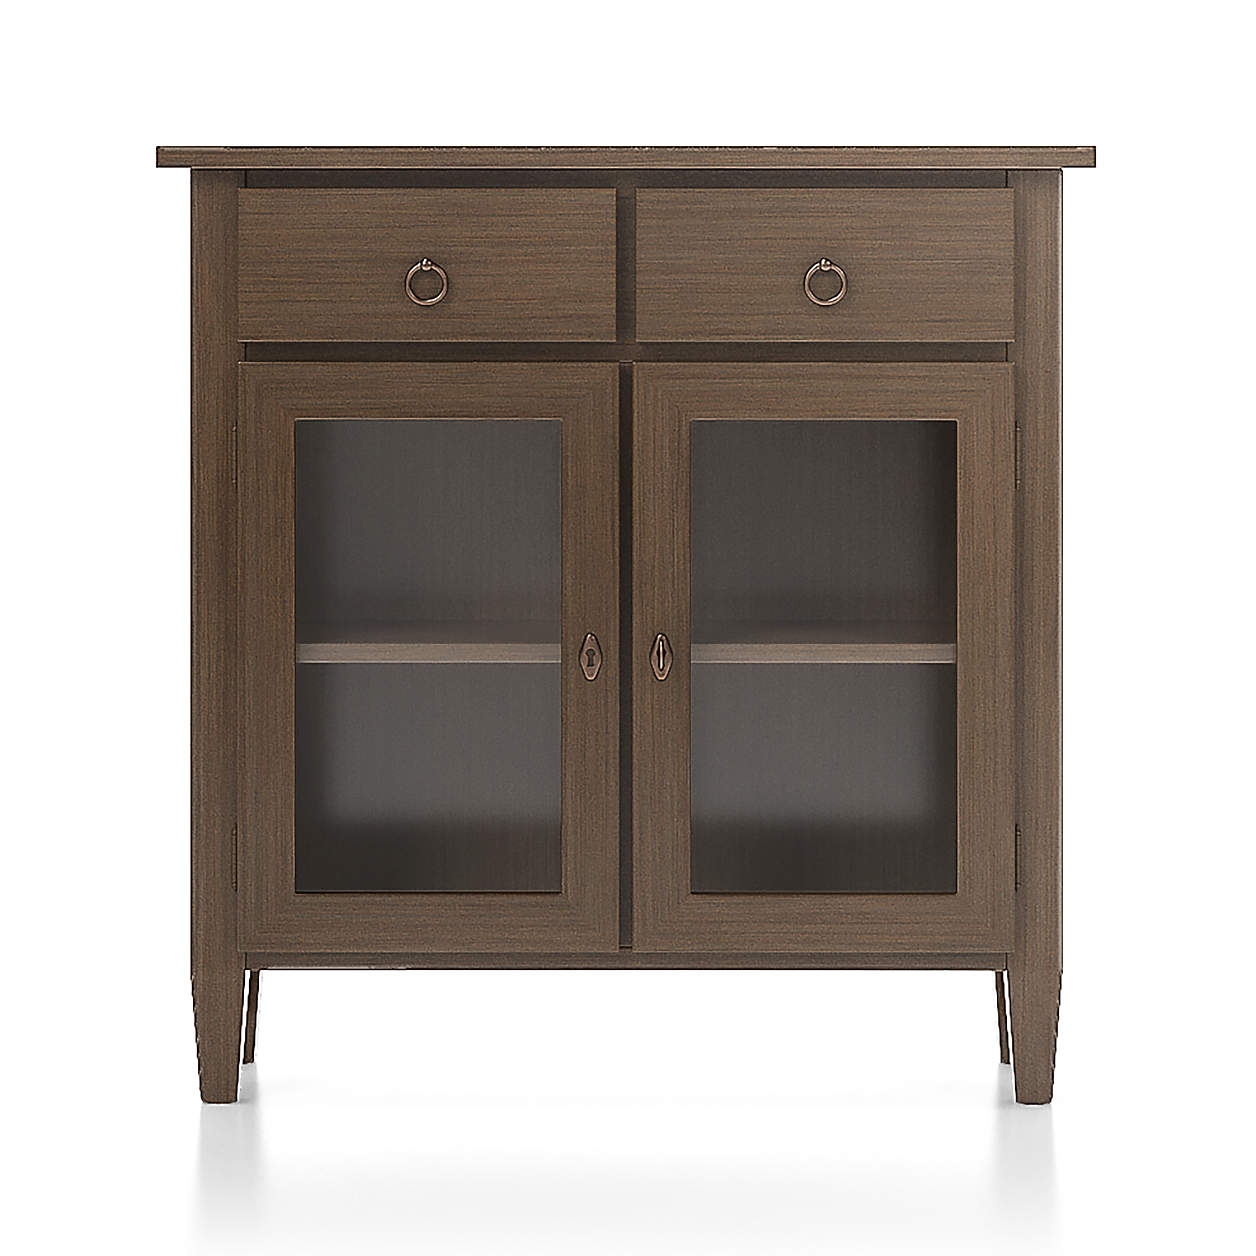 Stretto Pinot Lancaster Entryway Cabinet - Image 0